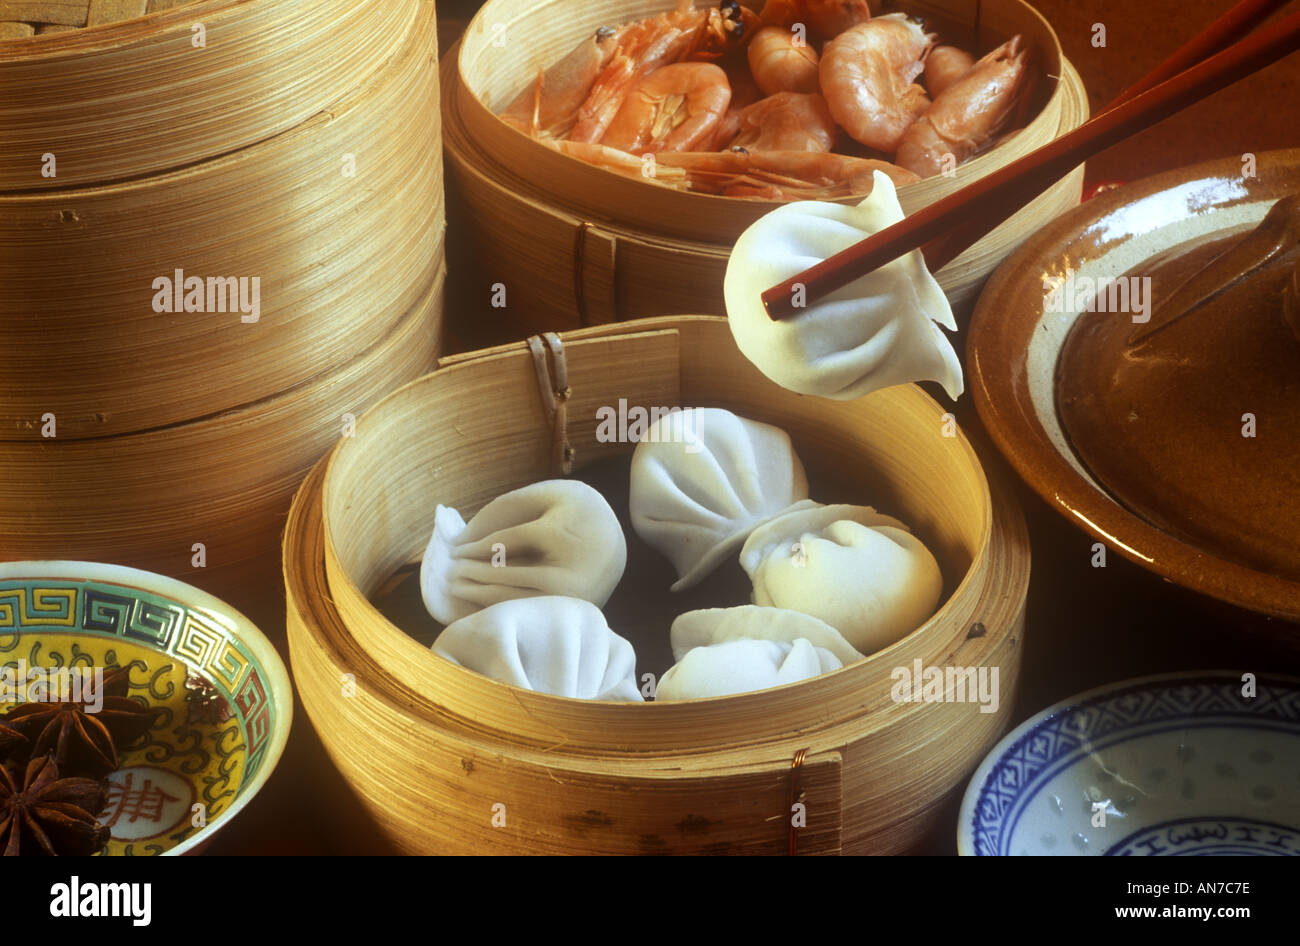 Chine Hong Kong Dim Sum alimentaire Banque D'Images